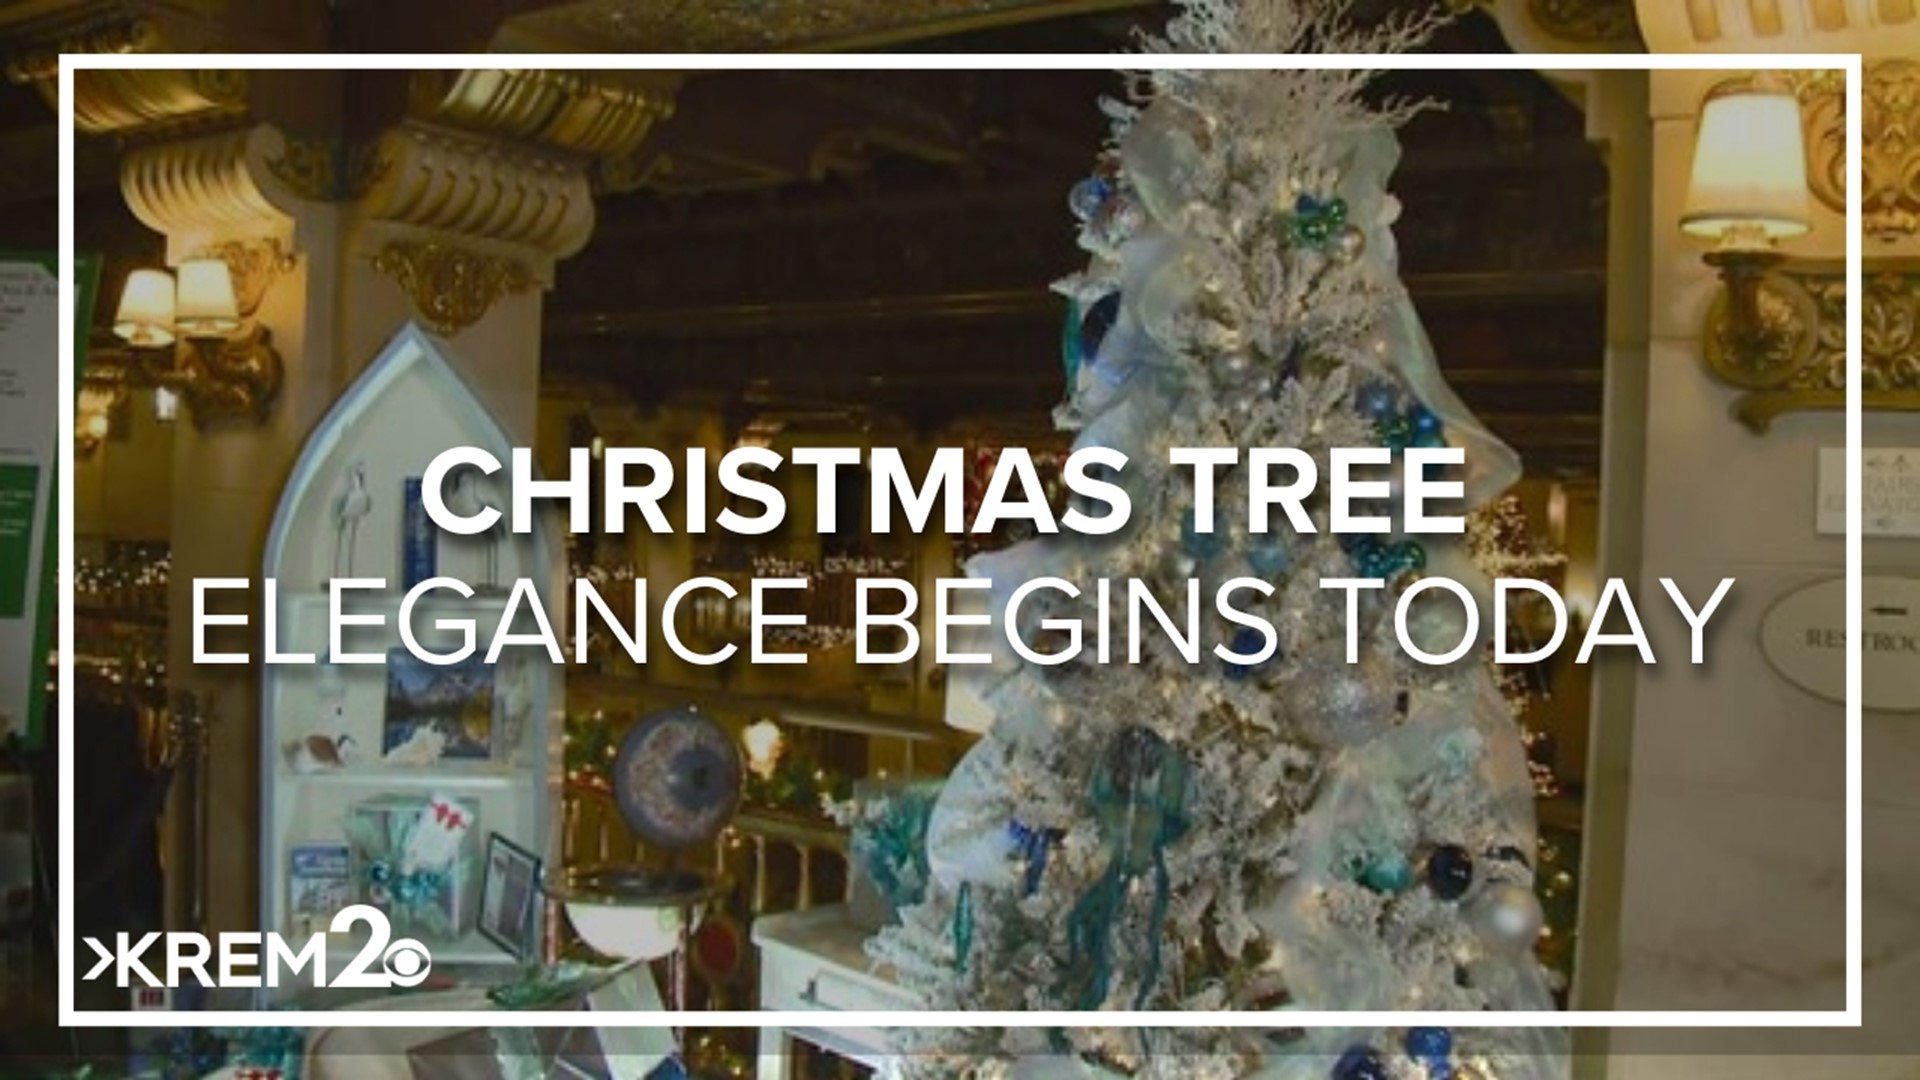 This year's event will feature 16 expertly decorated trees at the Historic Davenport Hotel and River Park Square.